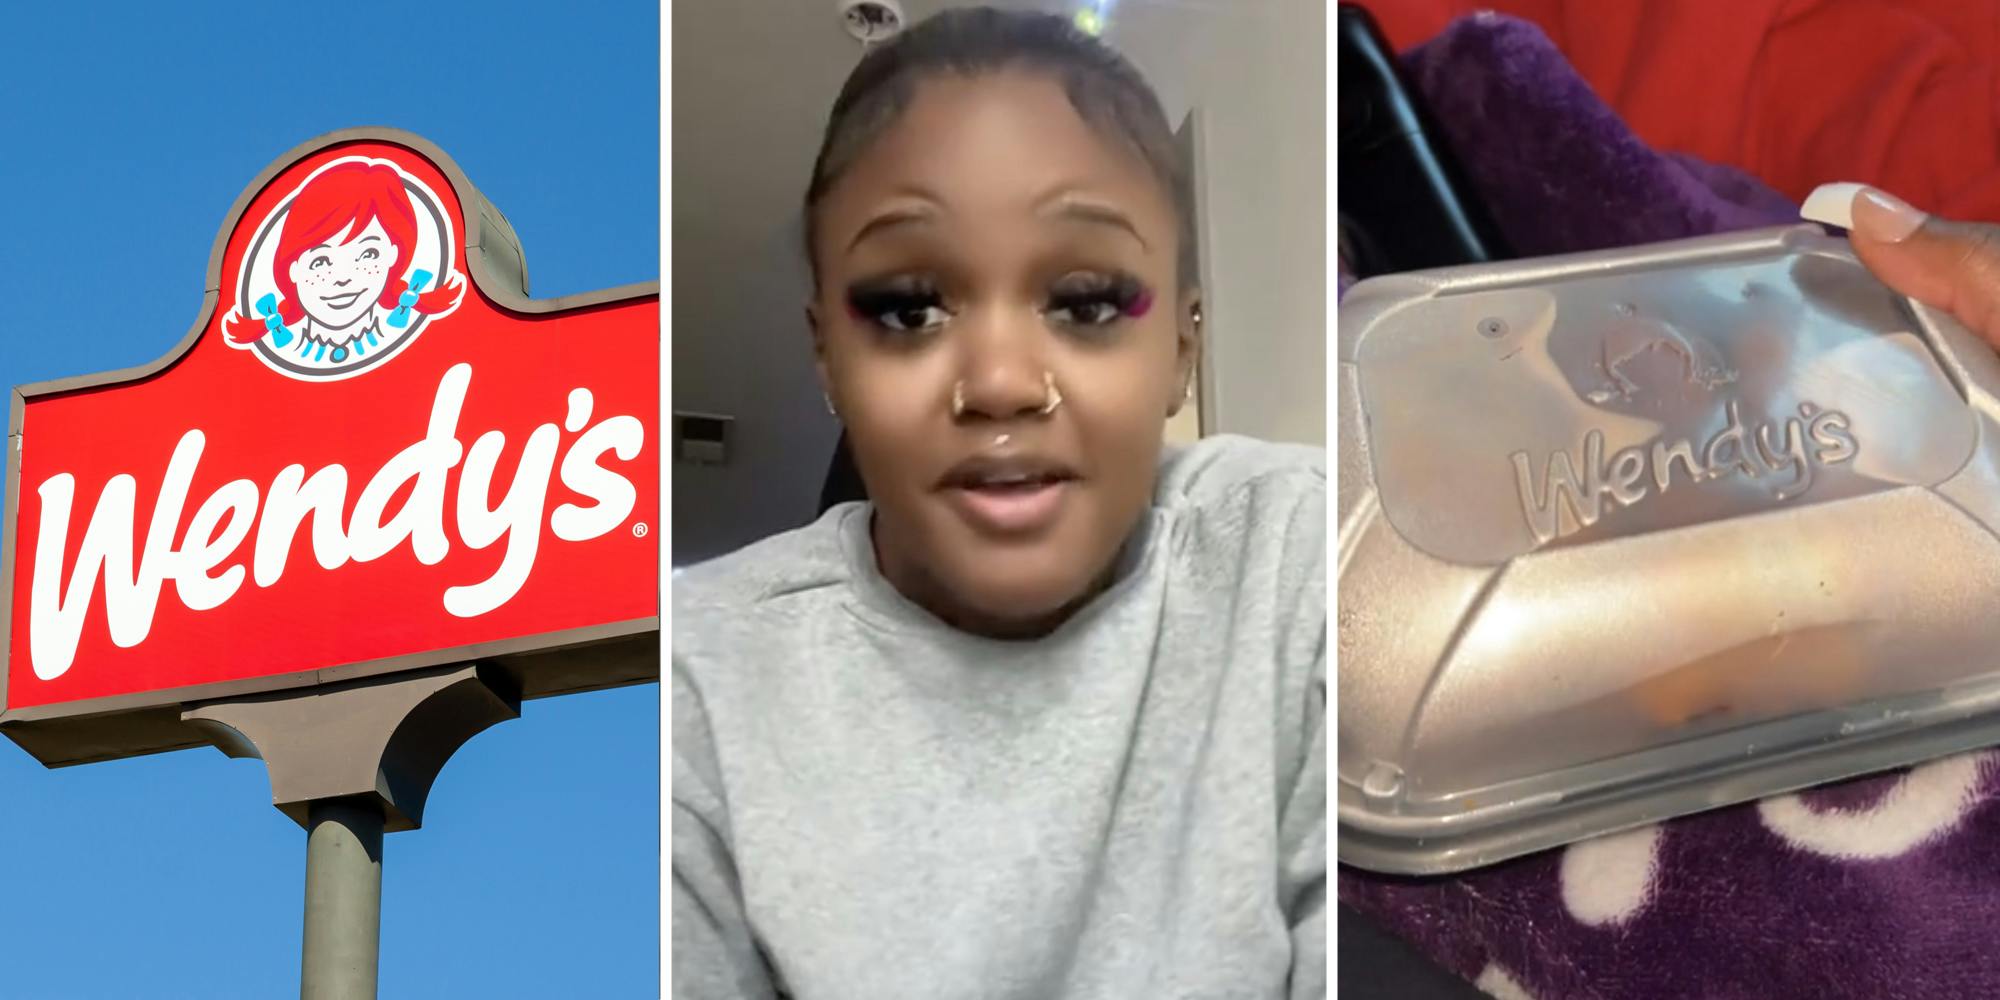 Wendy's(l), Woman talking(c), Nugget container(r)